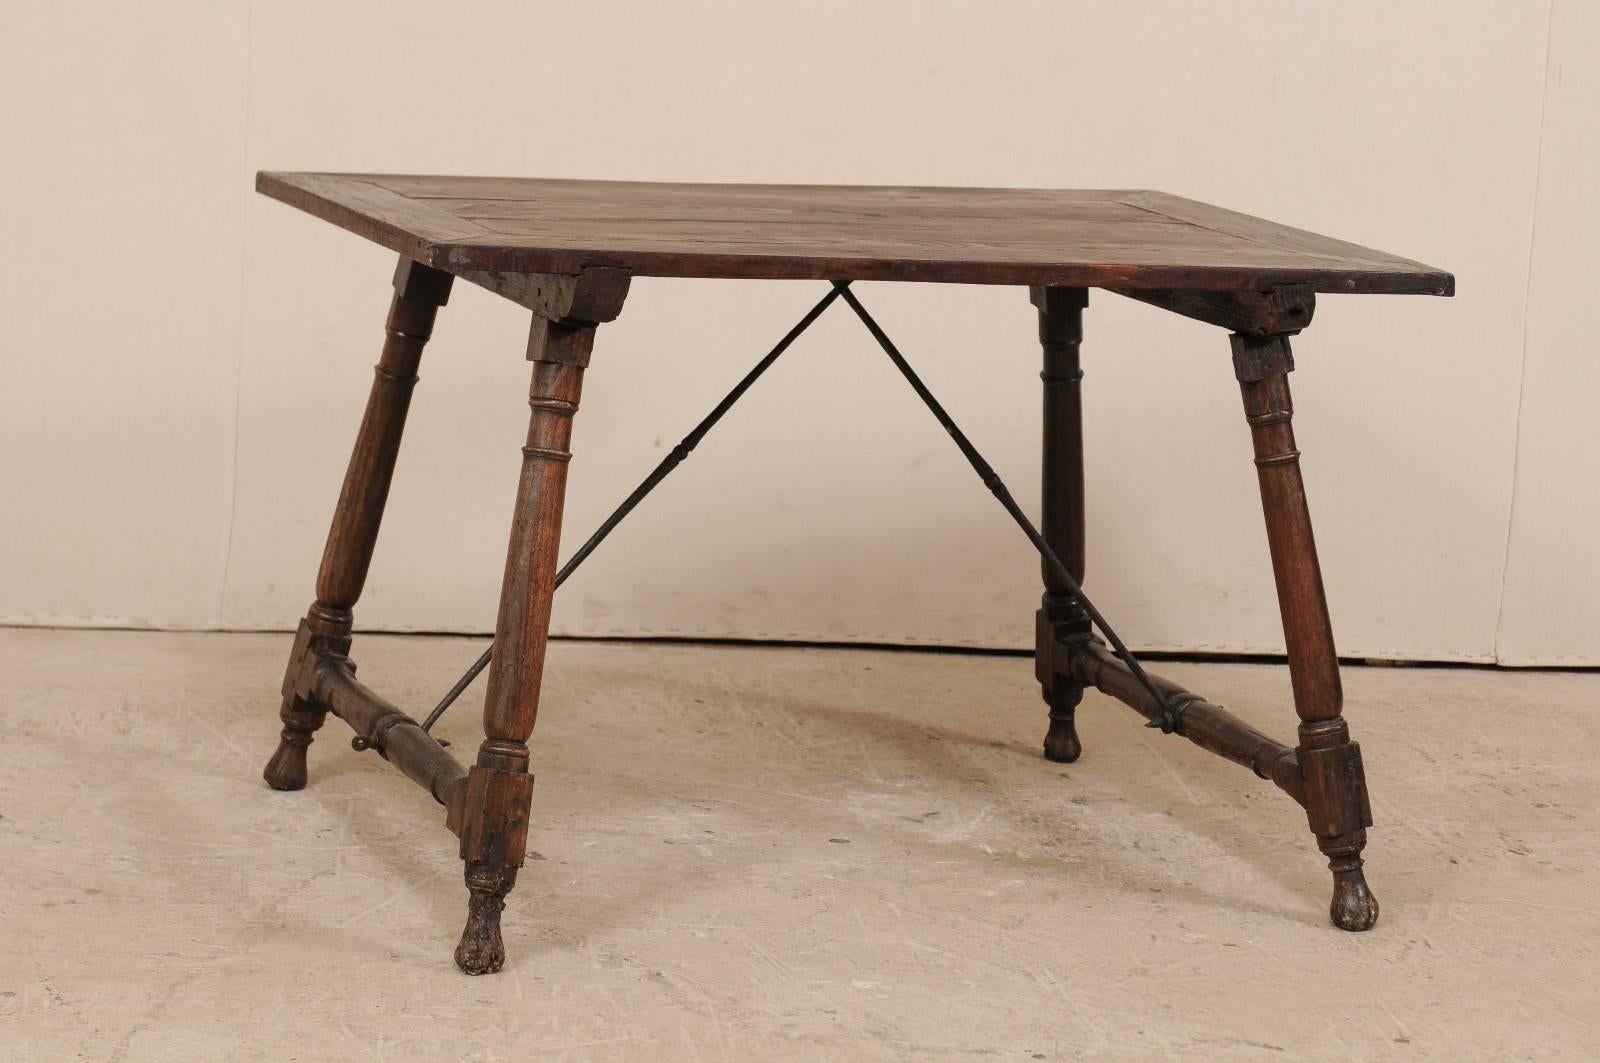 An antique Italian wood and iron stretchered desk table from the late 18th-early 19th century. This Italian desk features a rectangular-shaped top which is raised with outwardly tilting turned legs, which are supported with turned beams at each far